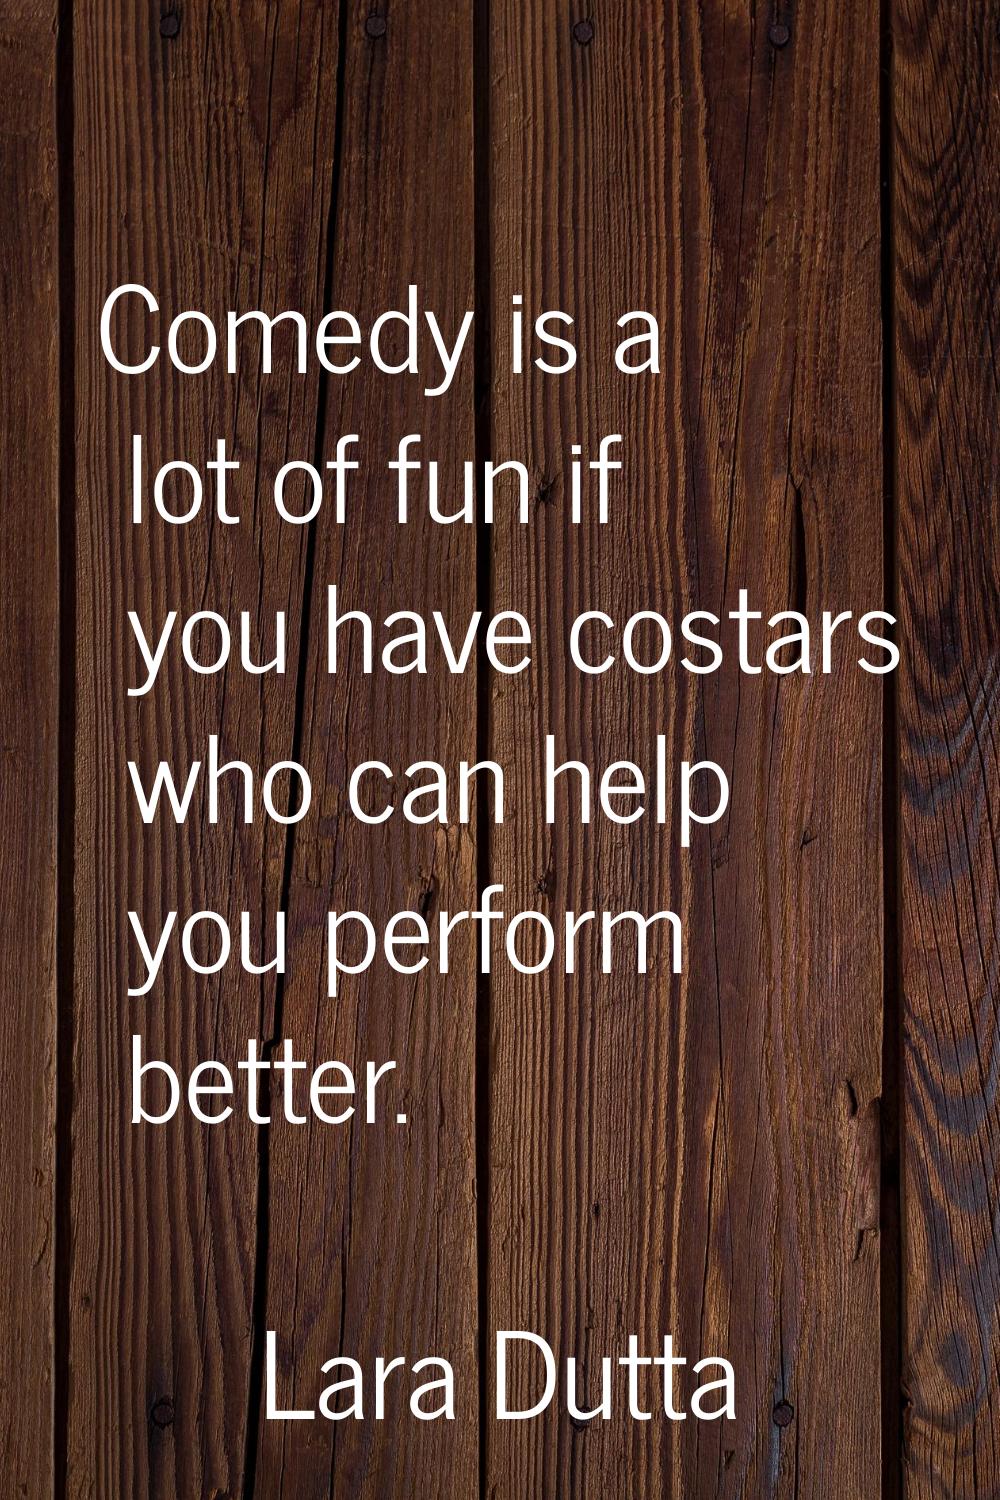 Comedy is a lot of fun if you have costars who can help you perform better.